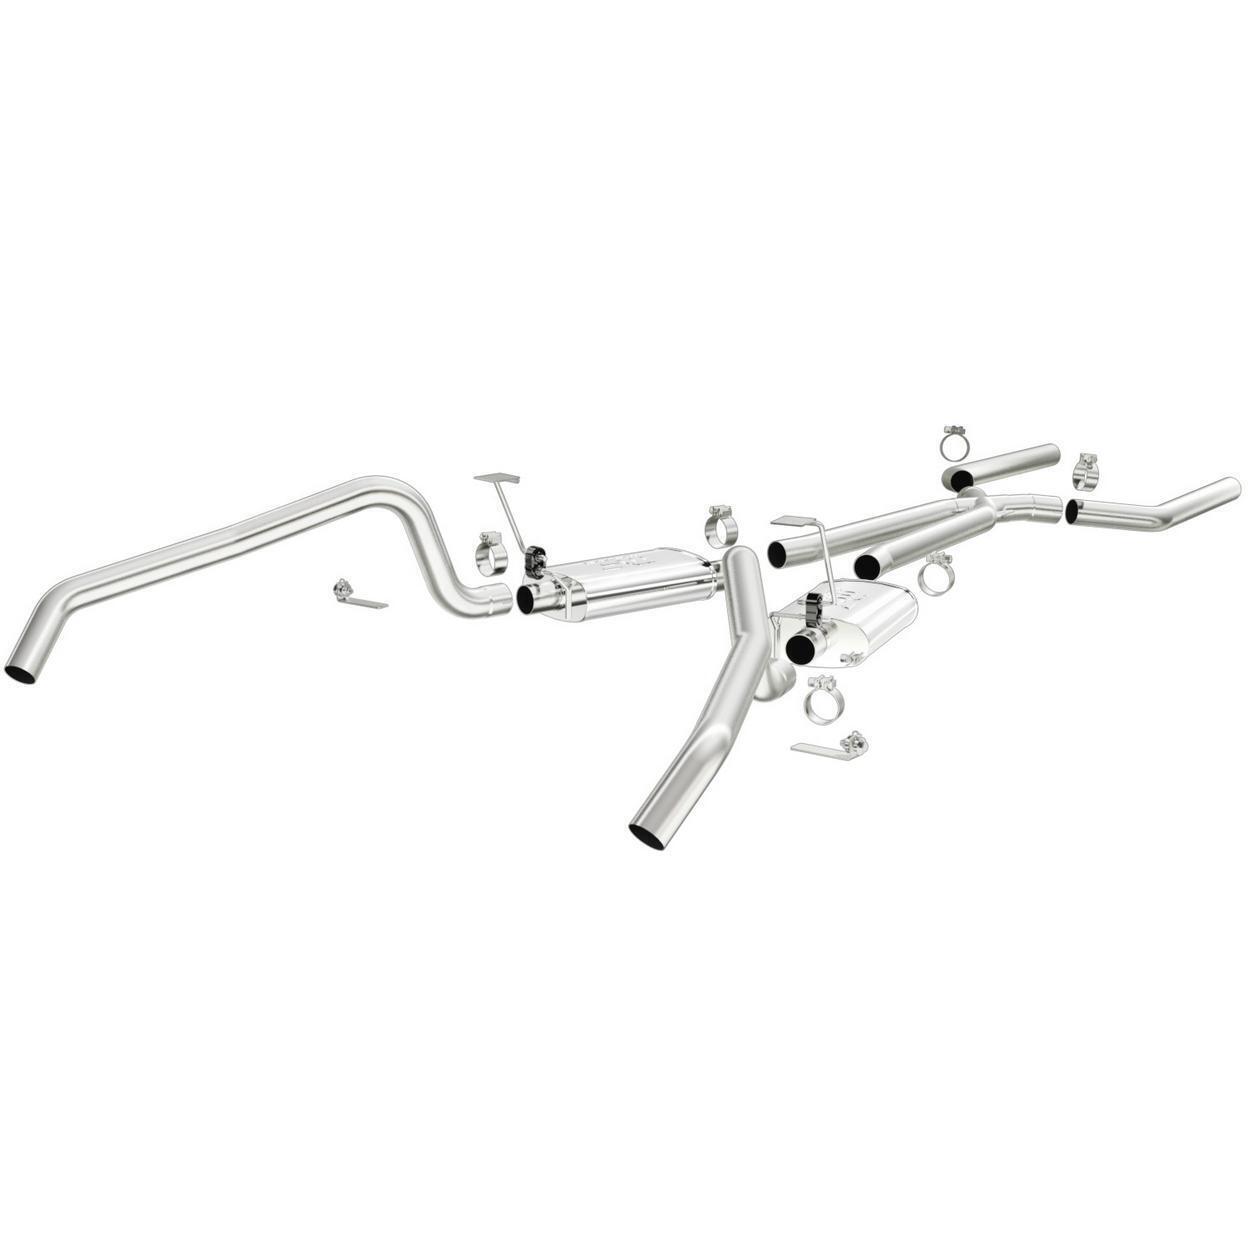 MagnaFlow Exhaust System Kit - Fits: 1973-1975 Buick Apollo, 1967-1969 Chevrolet